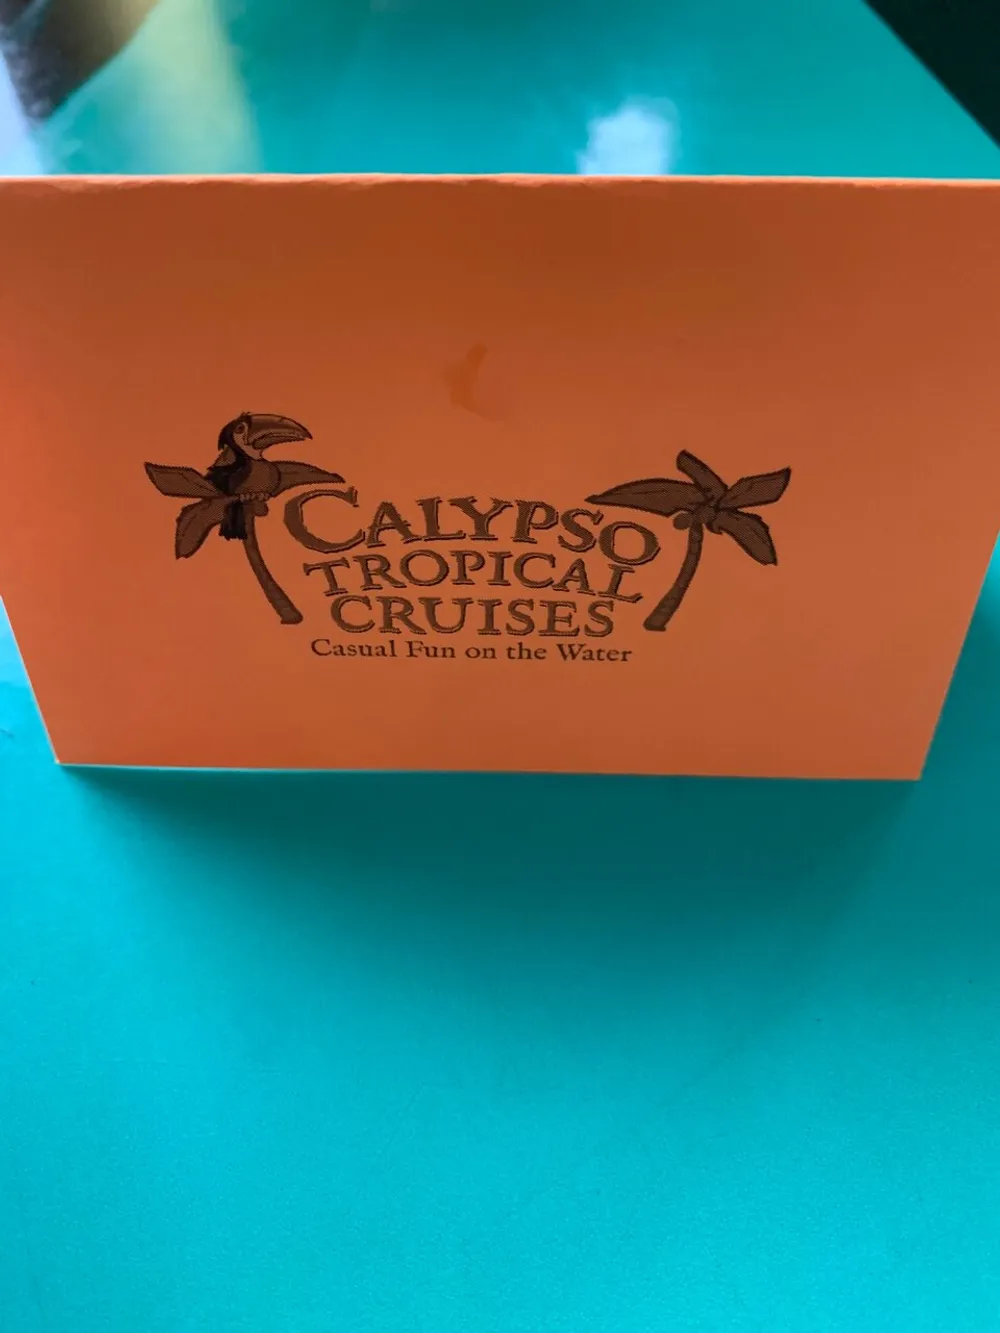 The image shows an orange card with the text CALYPSO TROPICAL CRUISES accompanied by graphics of palm trees and the tagline Casual Fun on the Water all resting on a teal surface